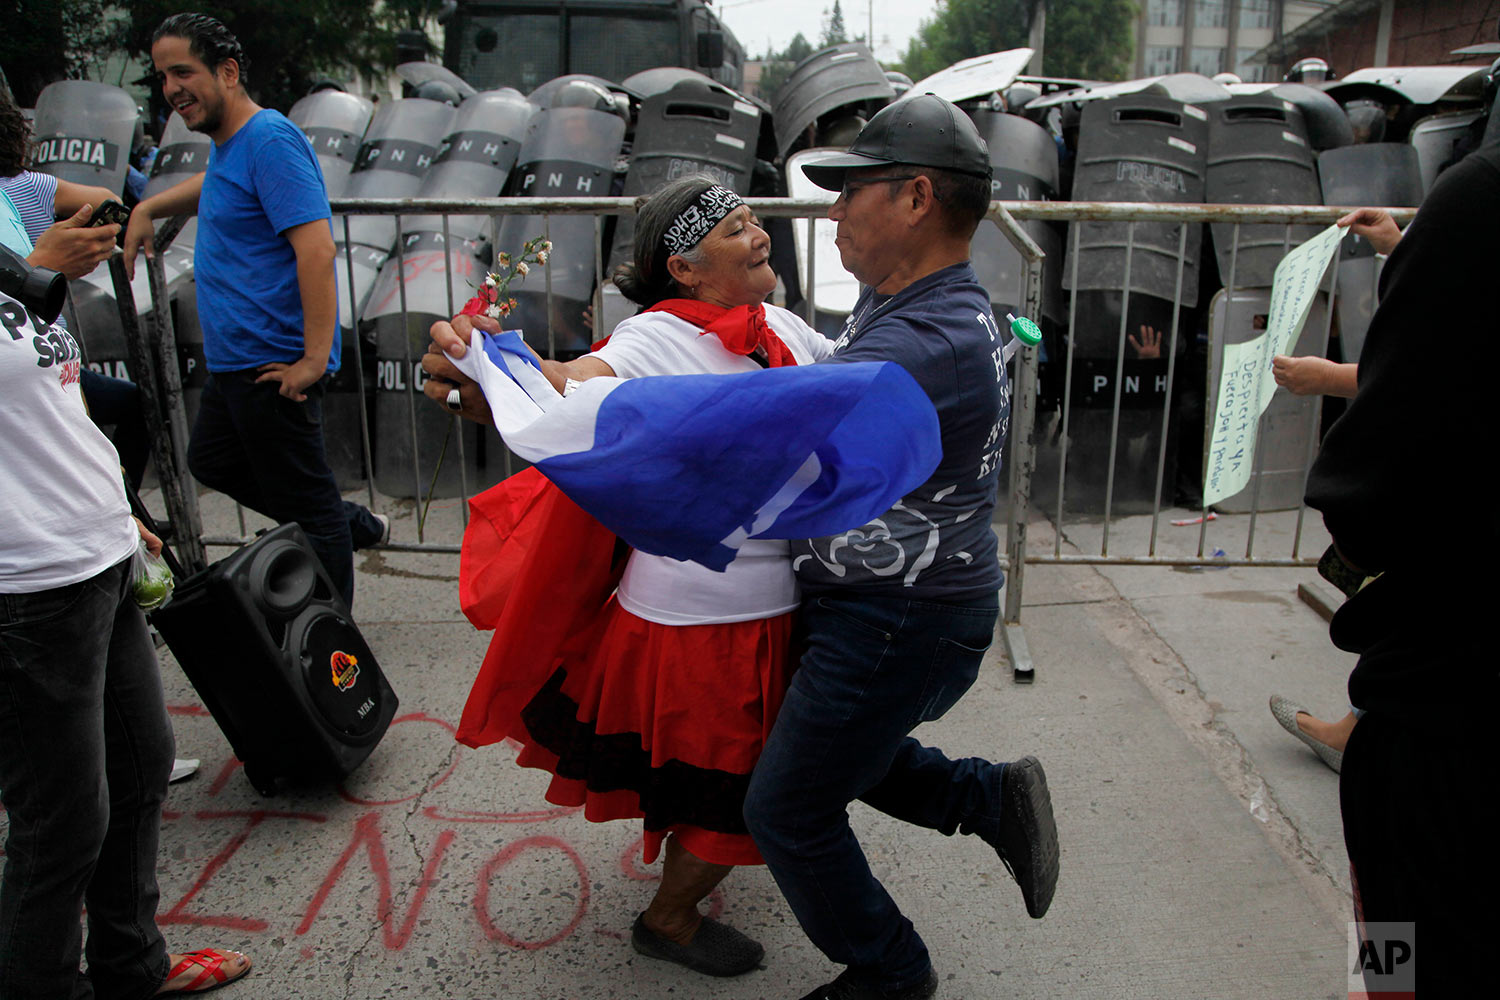  A couple dances in front of a police barricade during a protest in Tegucigalpa, Honduras, June 2, 2018, during a protest against Juan Orlando Hernandez' government before they were forcibly removed by military and police. (AP Photo/Fernando Antonio)